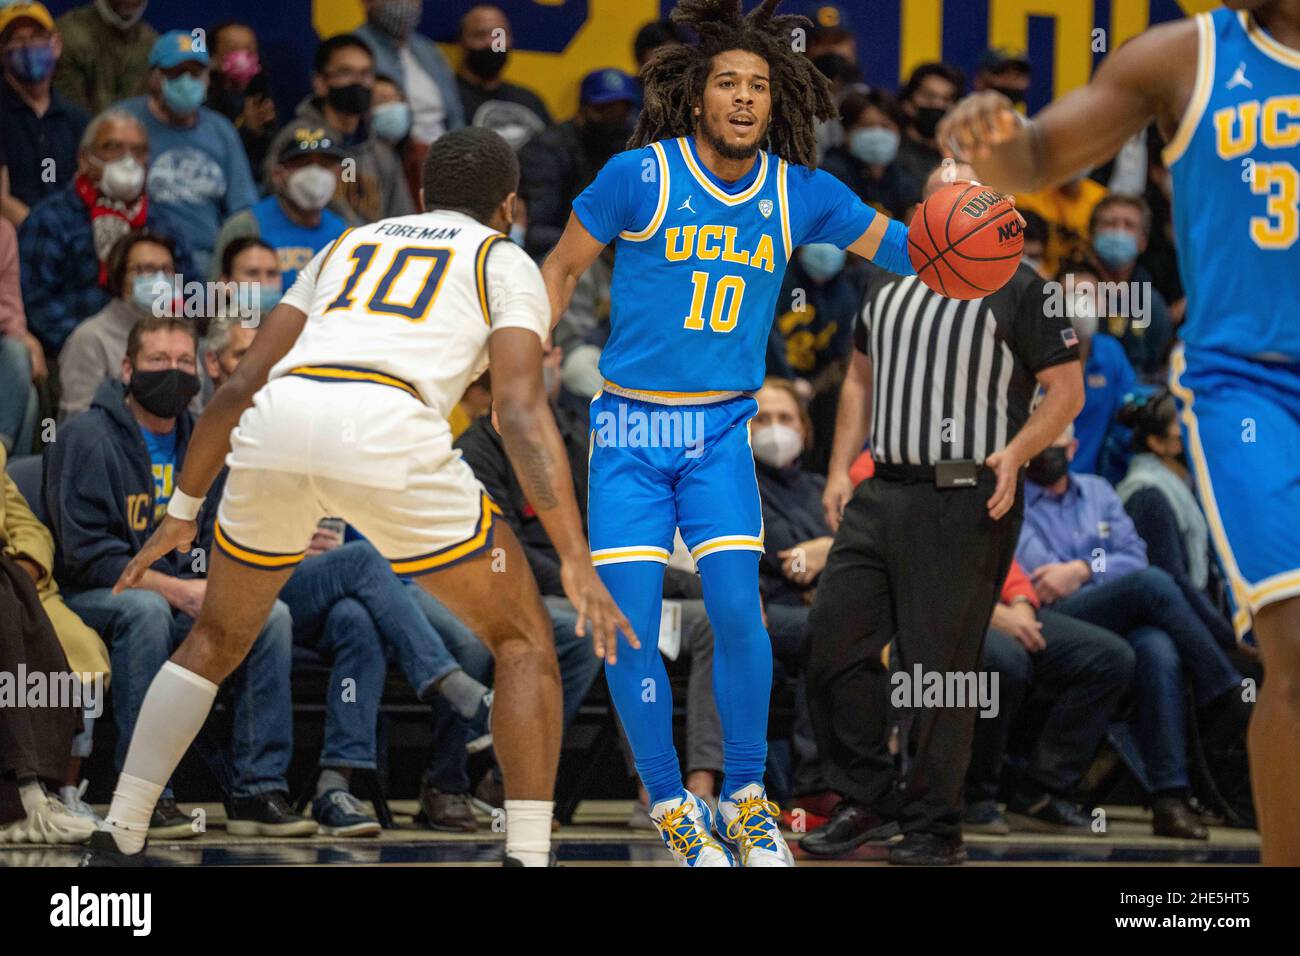 Berkeley, USA. 08th Jan, 2022. UCLA guard Tyger Campbell (10) brings the ball up court during the first half against California guard Makale Foreman (10) in Berkeley, California, Saturday December 8, 2022. (Neville Guard/Image of Sport) Photo via Credit: Newscom/Alamy Live News Stock Photo